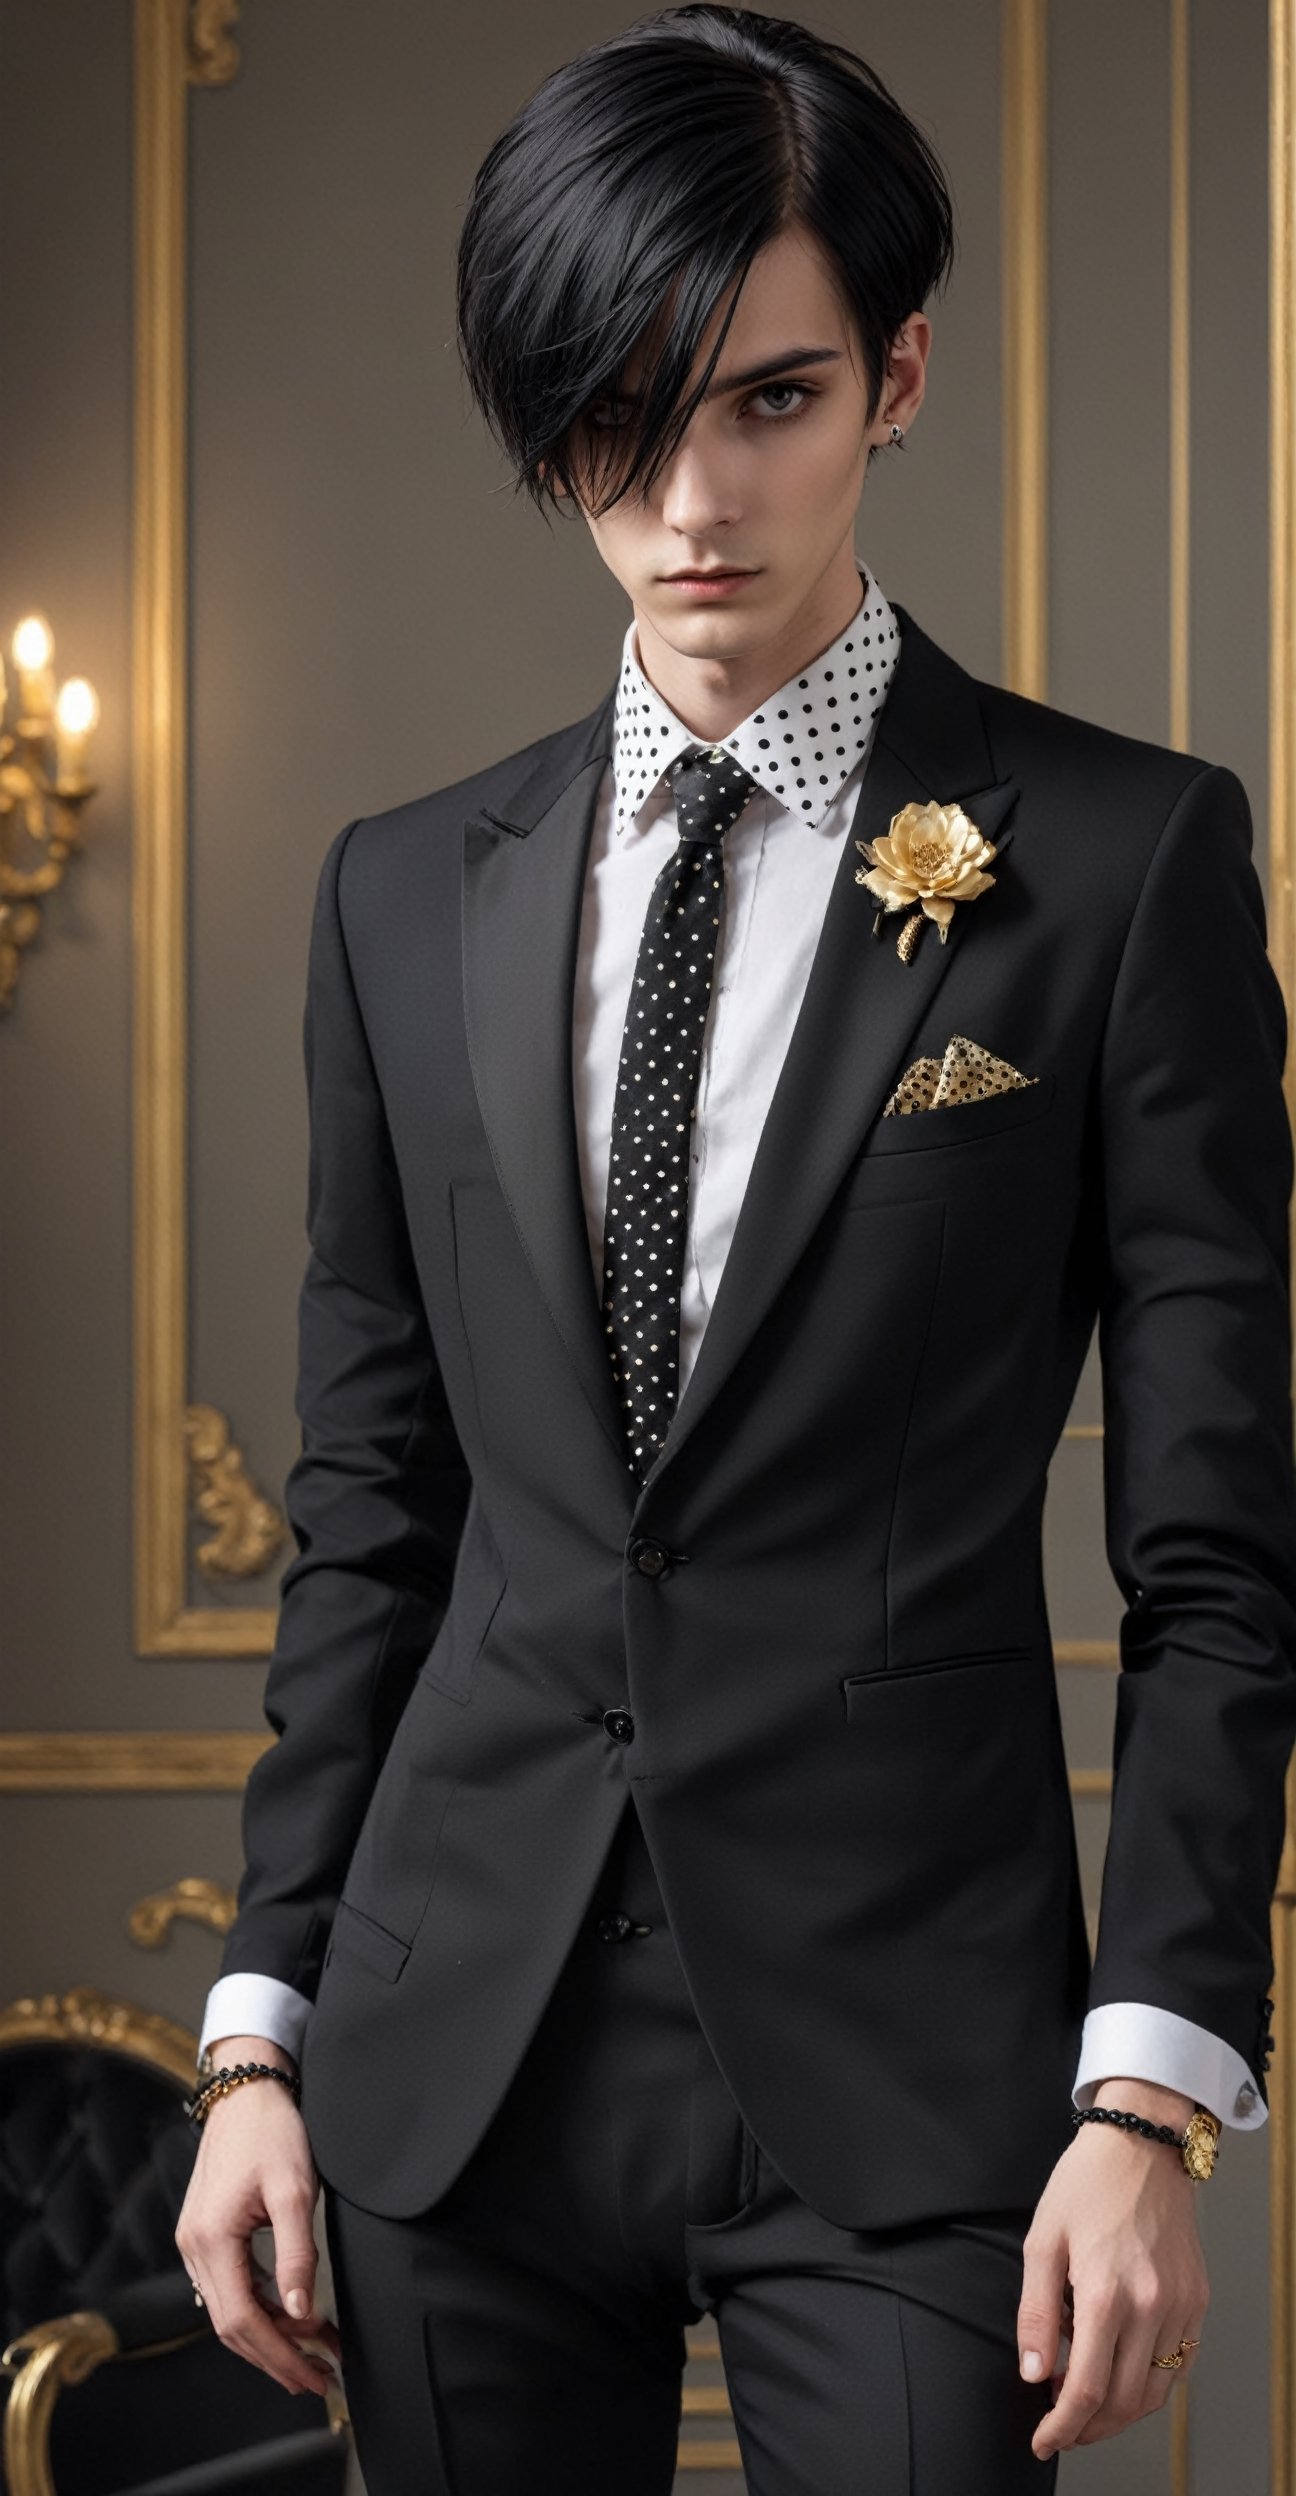 Solo,Realistic photo, nasty man, aesthetic French gentleman, emo aristocratic style, short hair,eye shadow,emo Gothic makeup, chic black business suit with polka dot tie,black manicure finger,(luxury golden lapel pin chain),
Flower handkerchief in chest pocket, Slender man with long legs and tall stature,Handsome boy,abmhandsomeguy